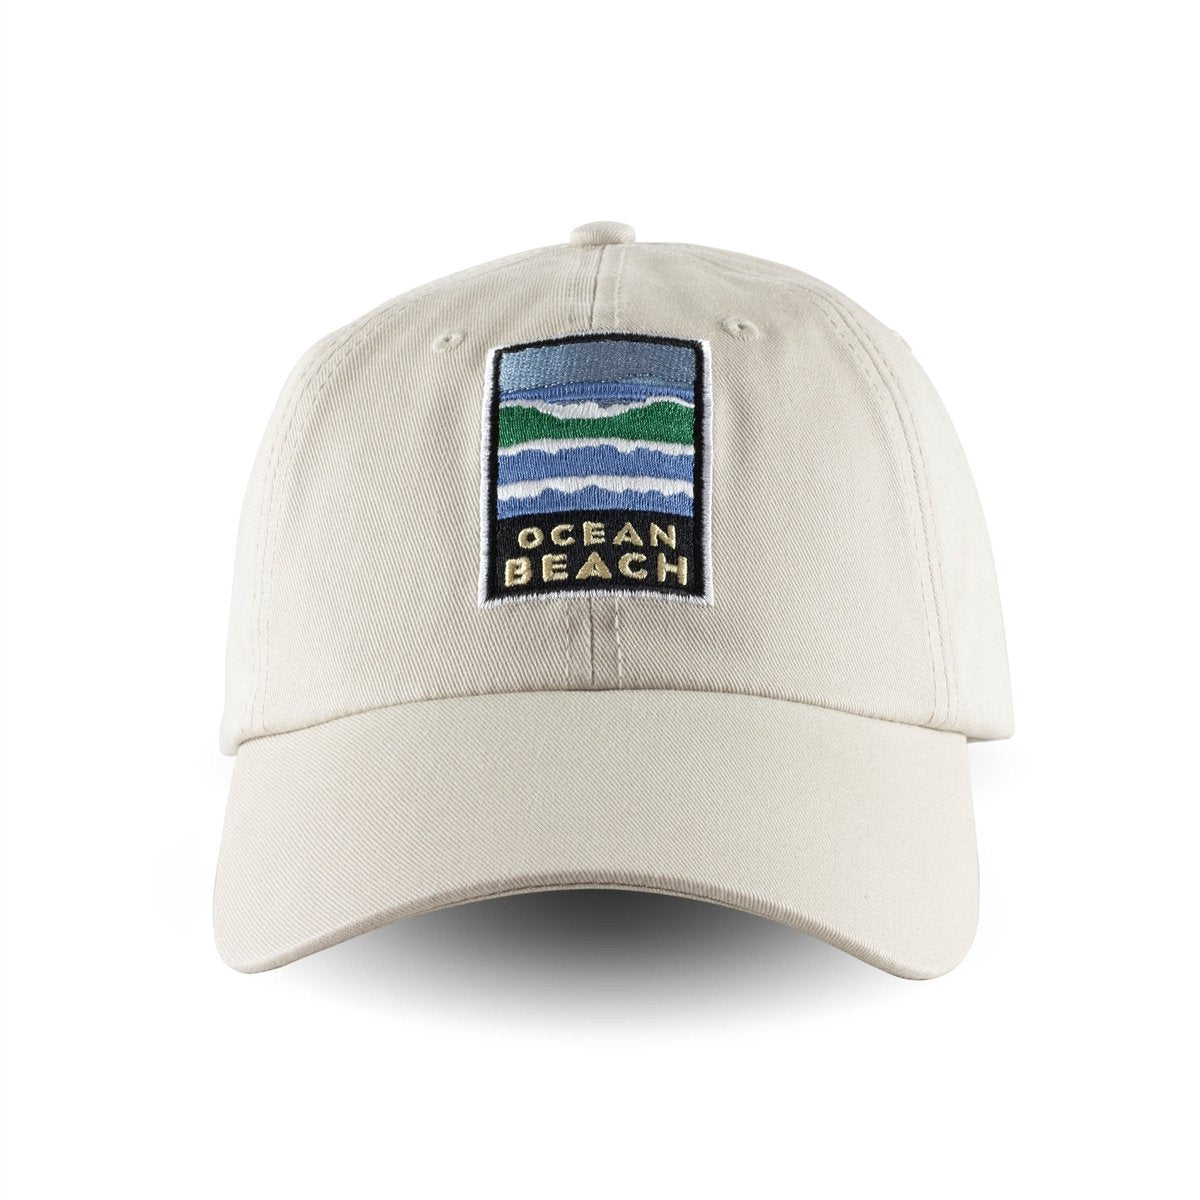 Tan baseball cap with colorful embroidered Ocean Beach logo on front panels. Artwork by Michael Schwab.